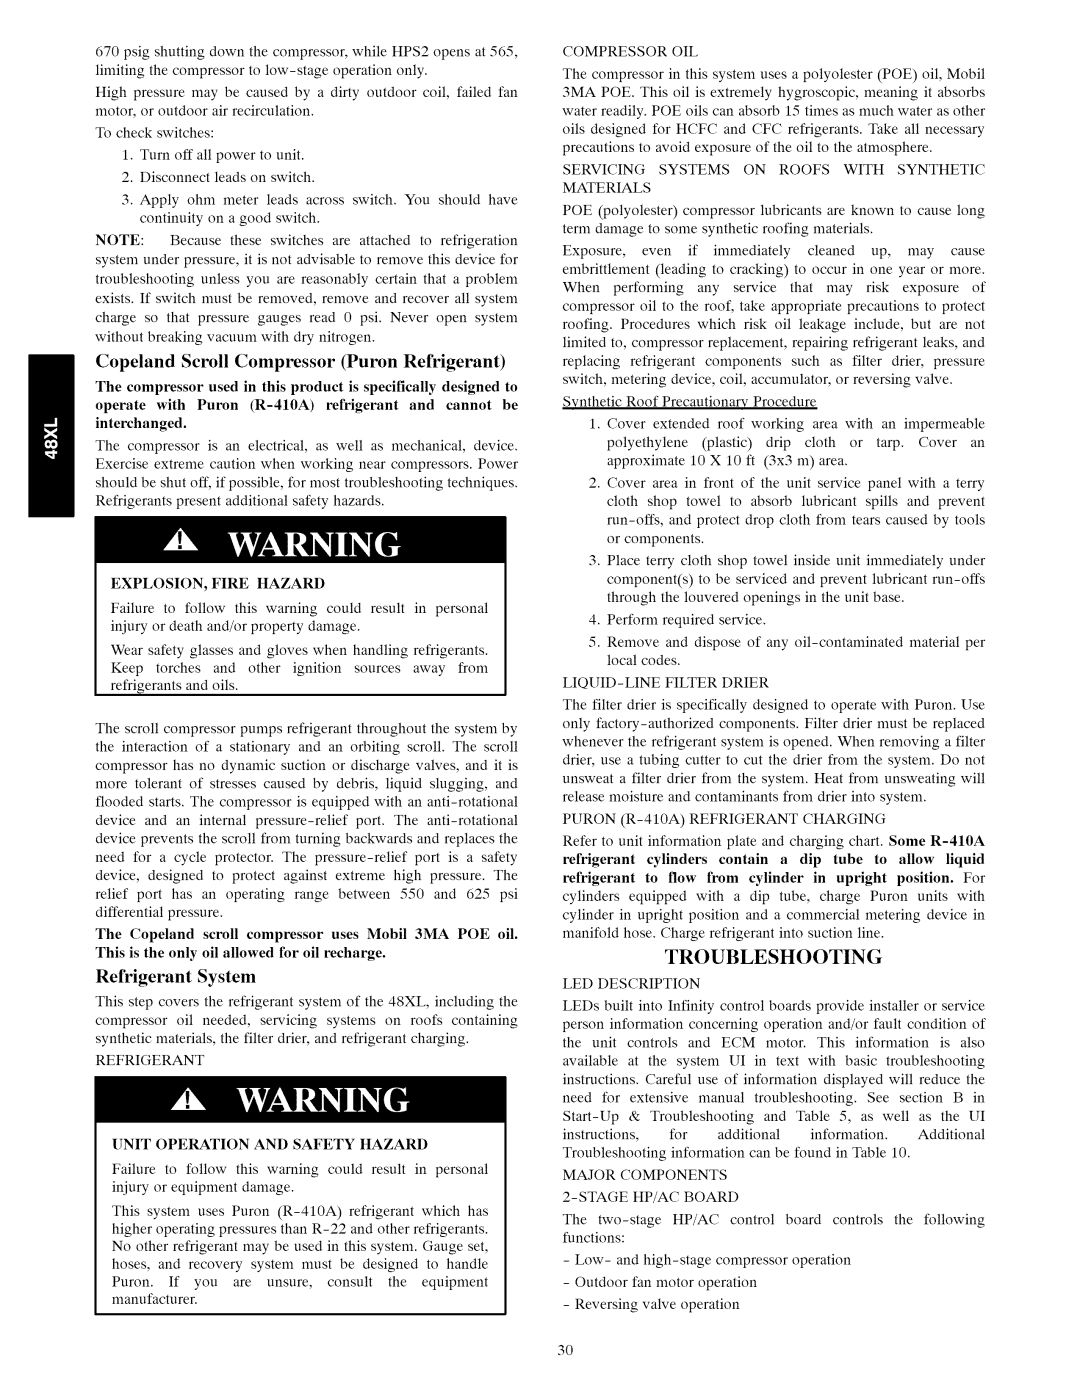 Carrier 48XL installation instructions Troubleshooting, Refrigerant System, Liquid-Line Filter Drier 